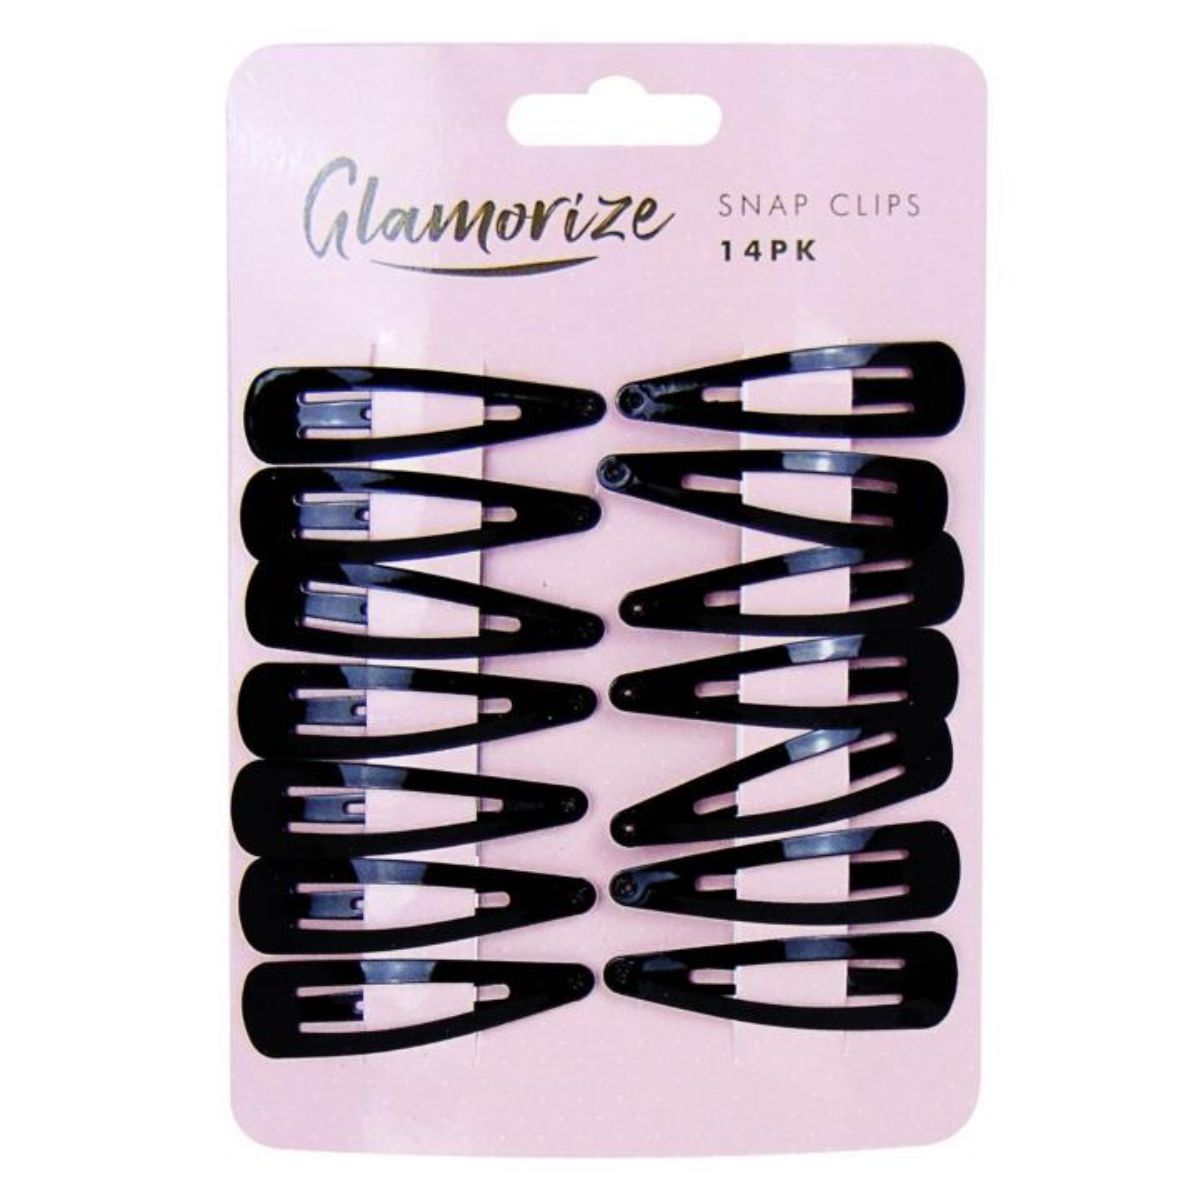 A pack of Glamorize Snap Clips - 14pcs displayed on a pink retail card.